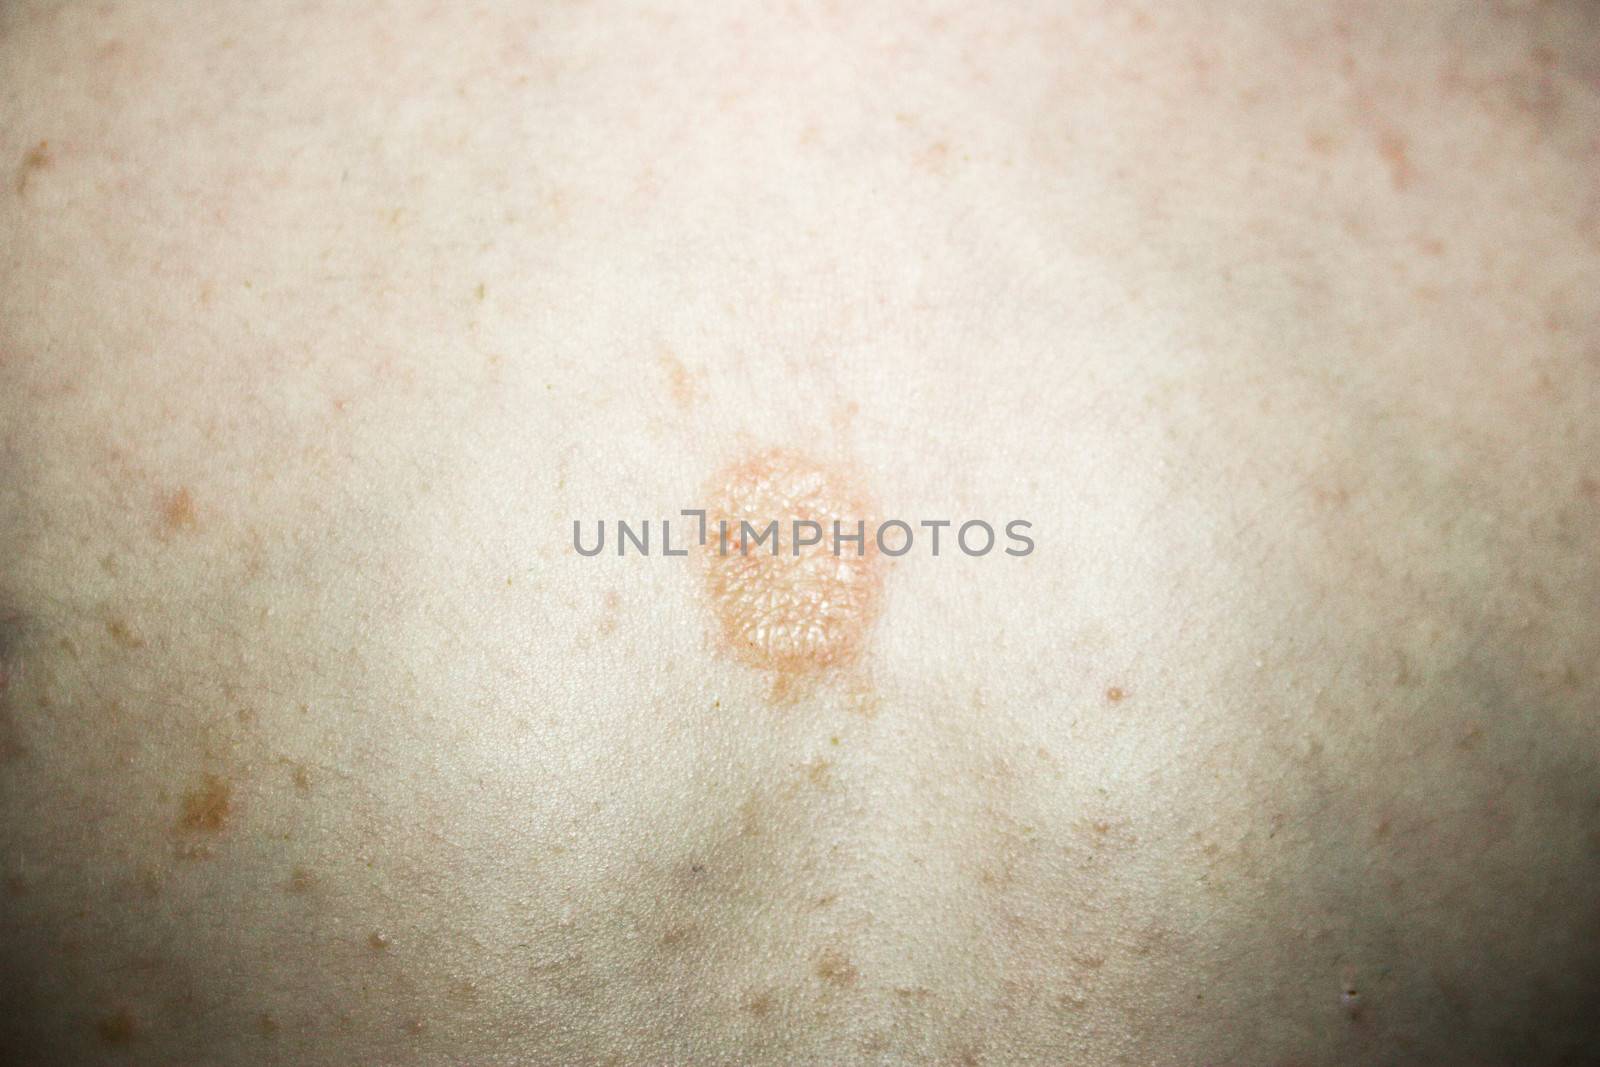 atopic dermatitis. Eczema on the skin of a child. photo for your design